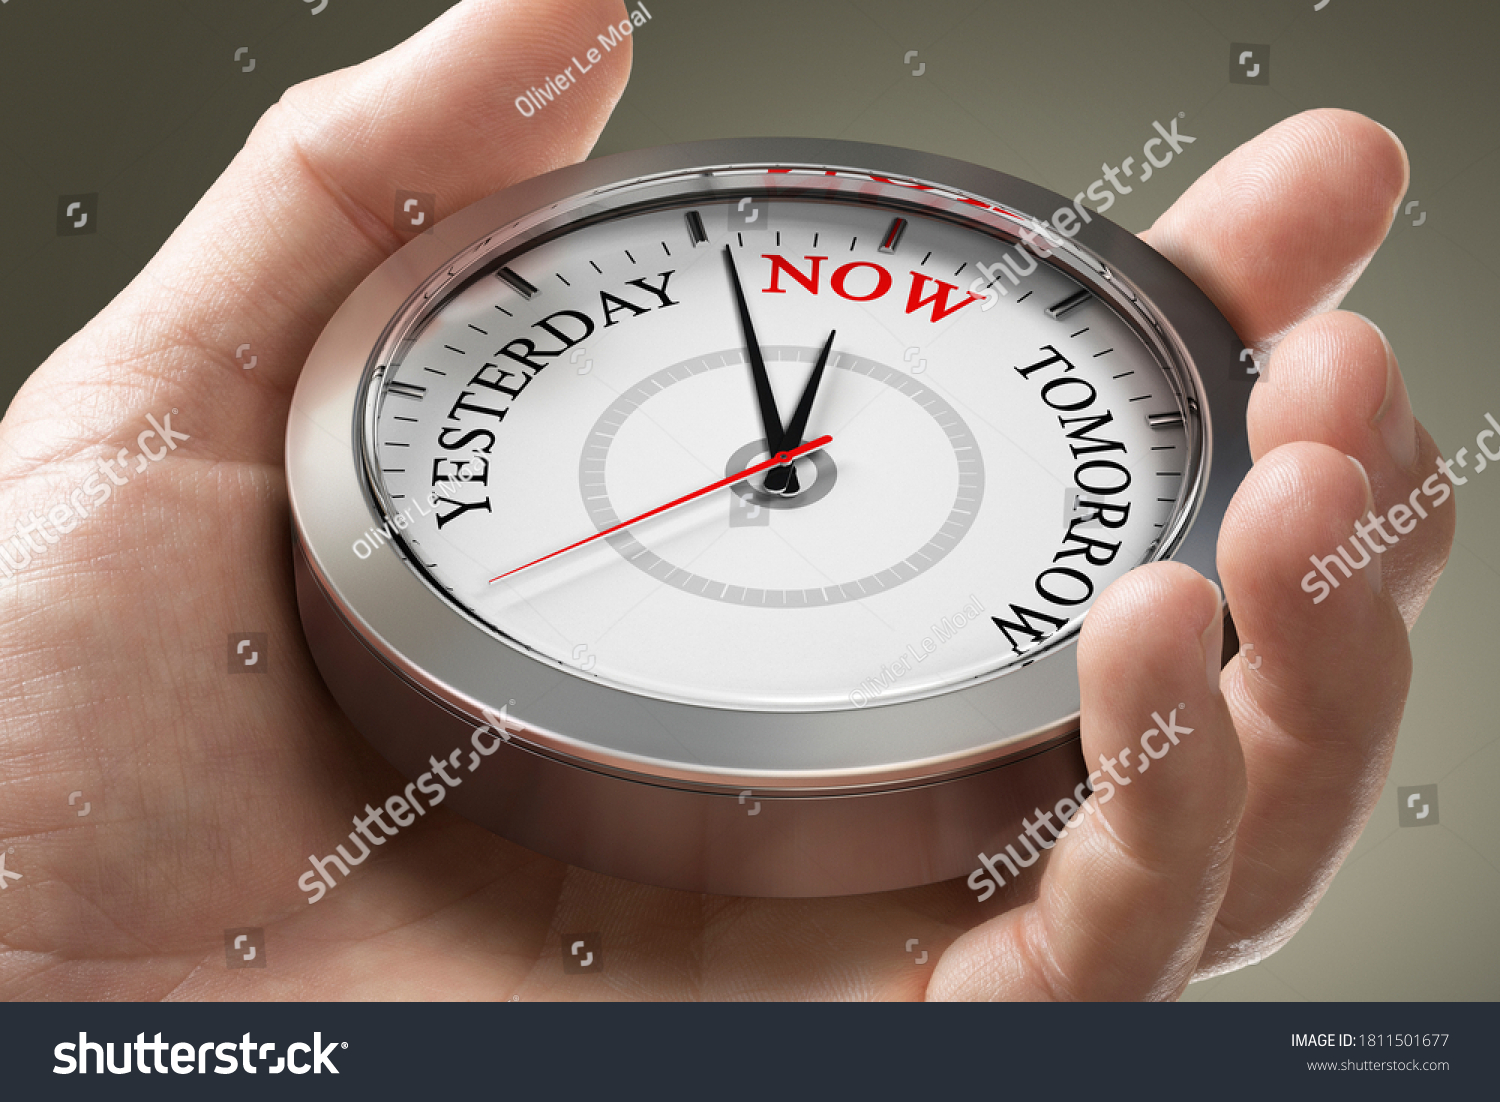 Man hand holding a conceptual clock with the words yesterday, now and tomorrow. Concept of time management or living in the present moment. Composite image between a photography and a 3D background. #1811501677